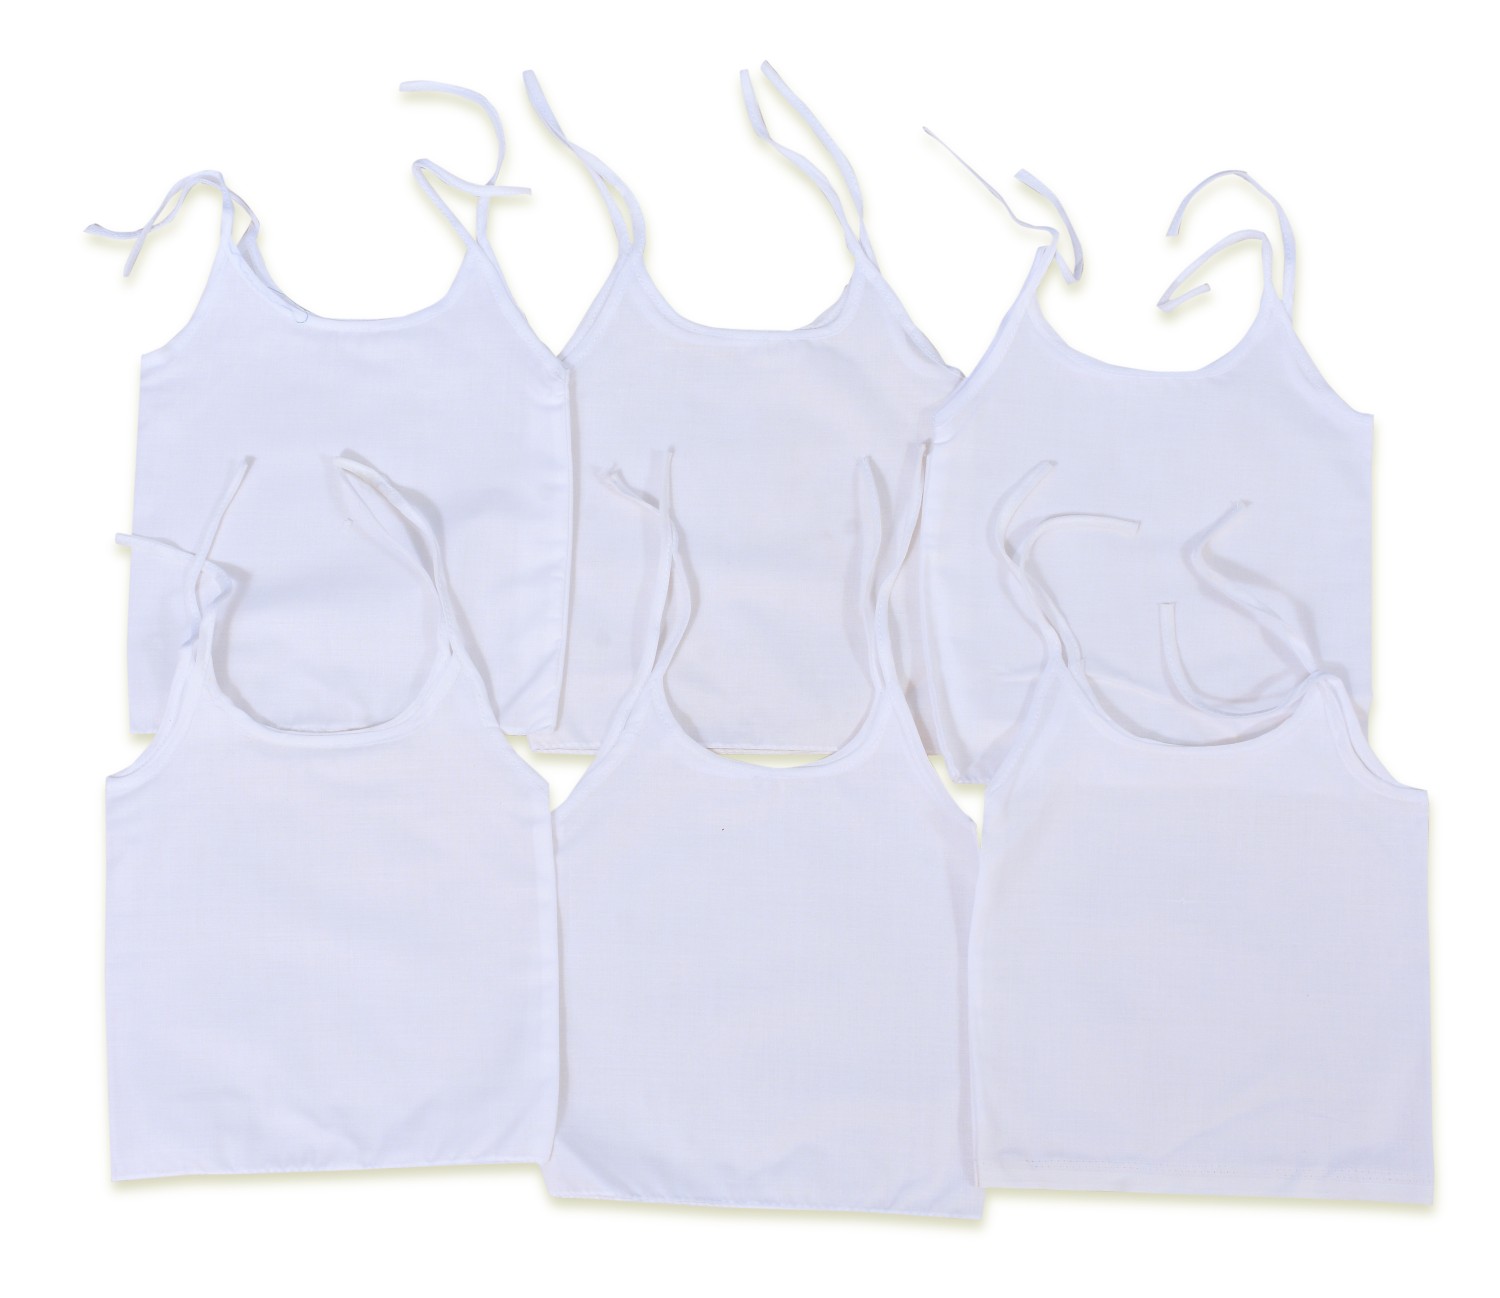 0-3 Month Baby White Jhabla Dress - Sleeveless Cotton Top for Exceptional Softness and Comfort